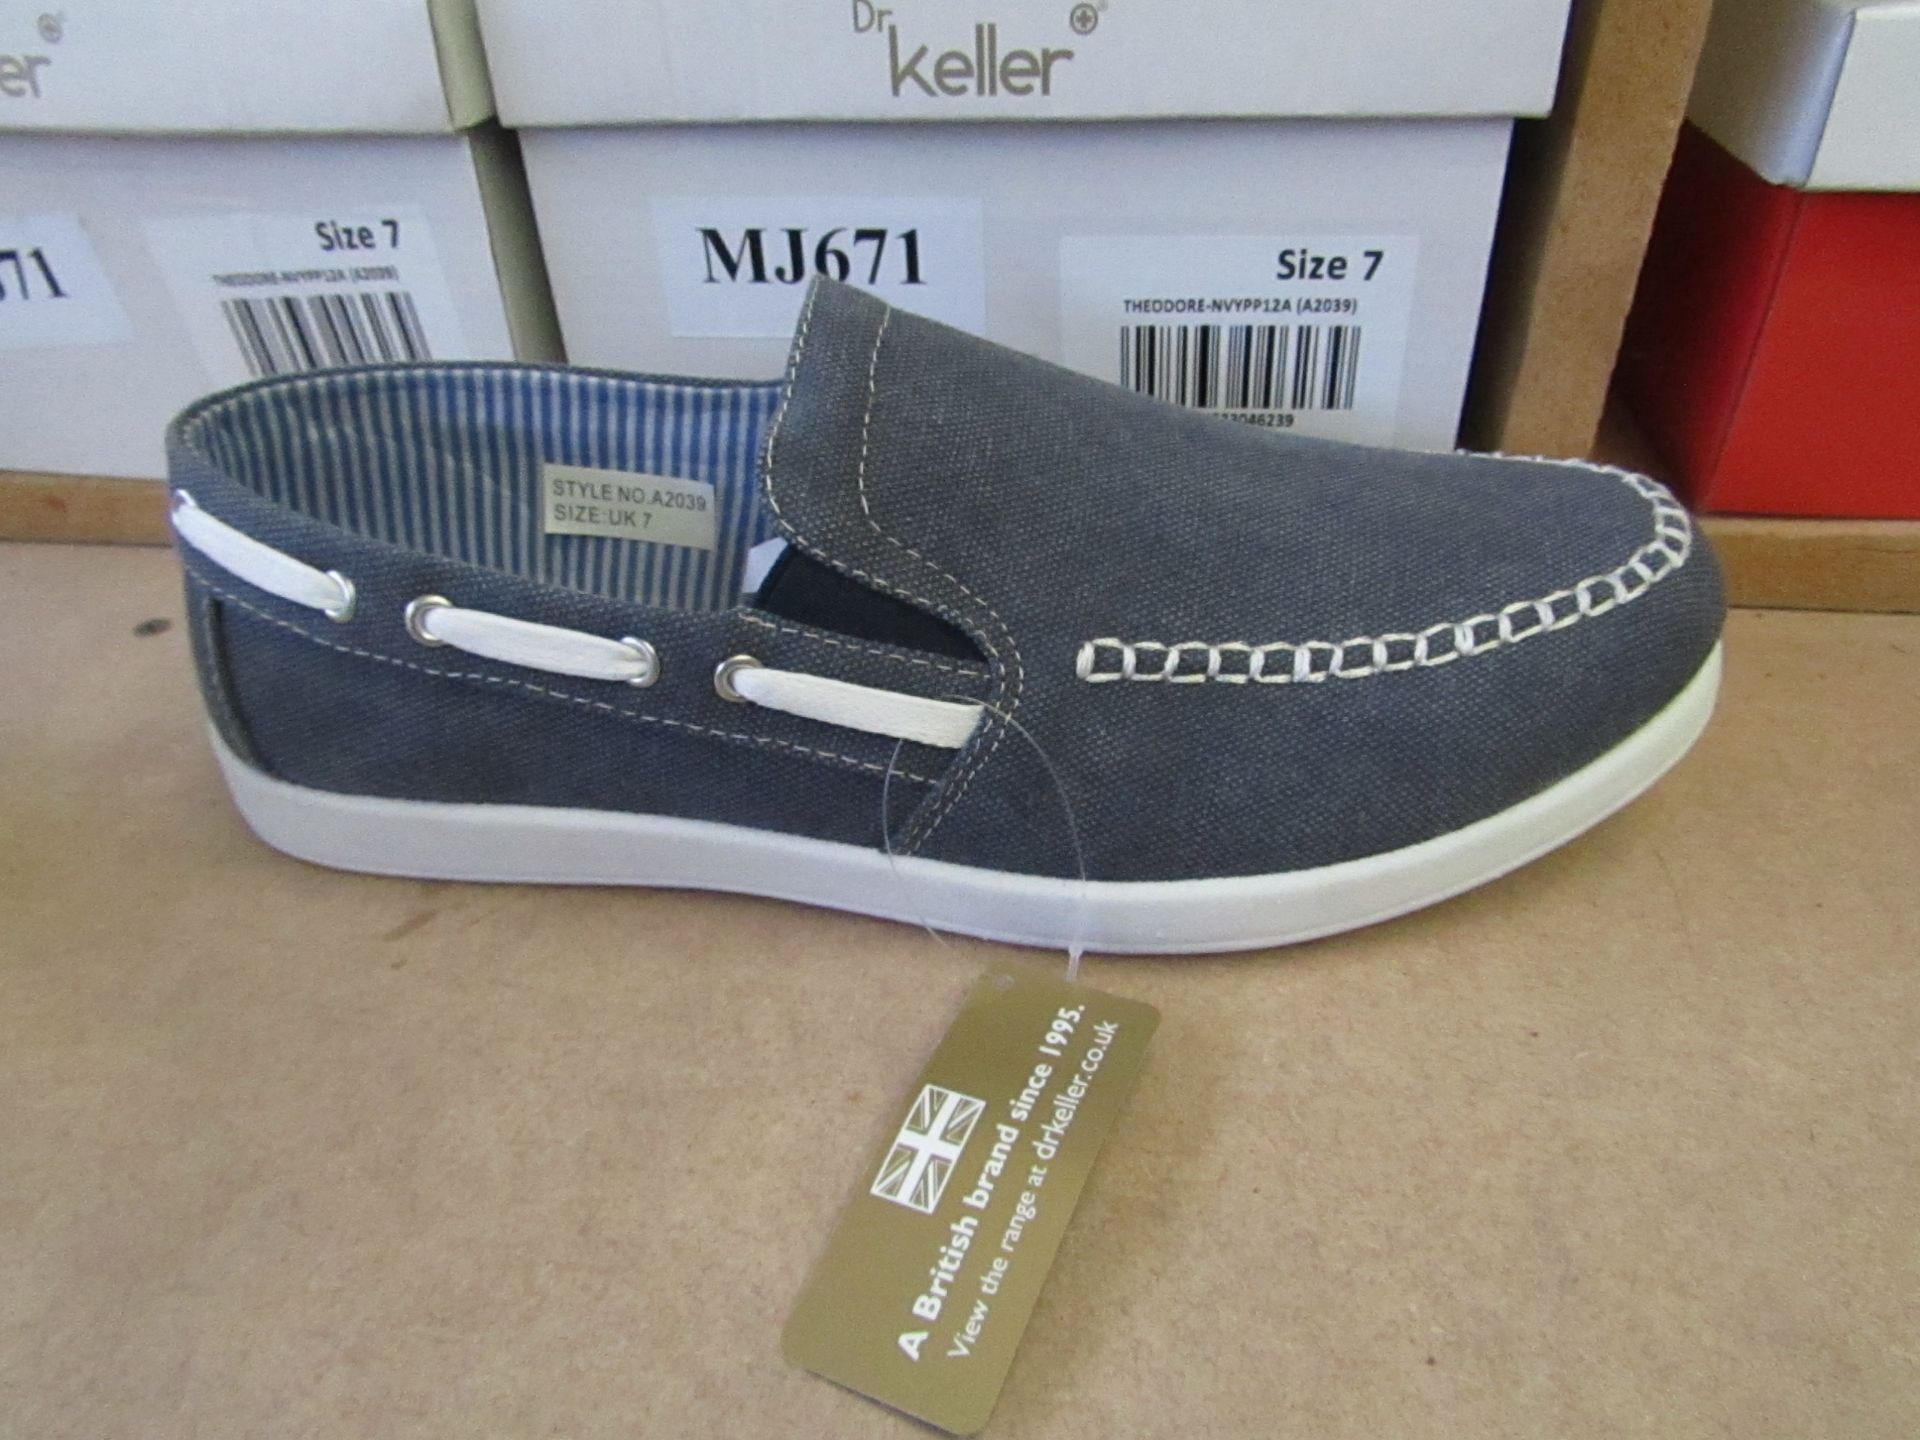 DR Keller Navy Boot Shoes, new and boxed, Size UK 7